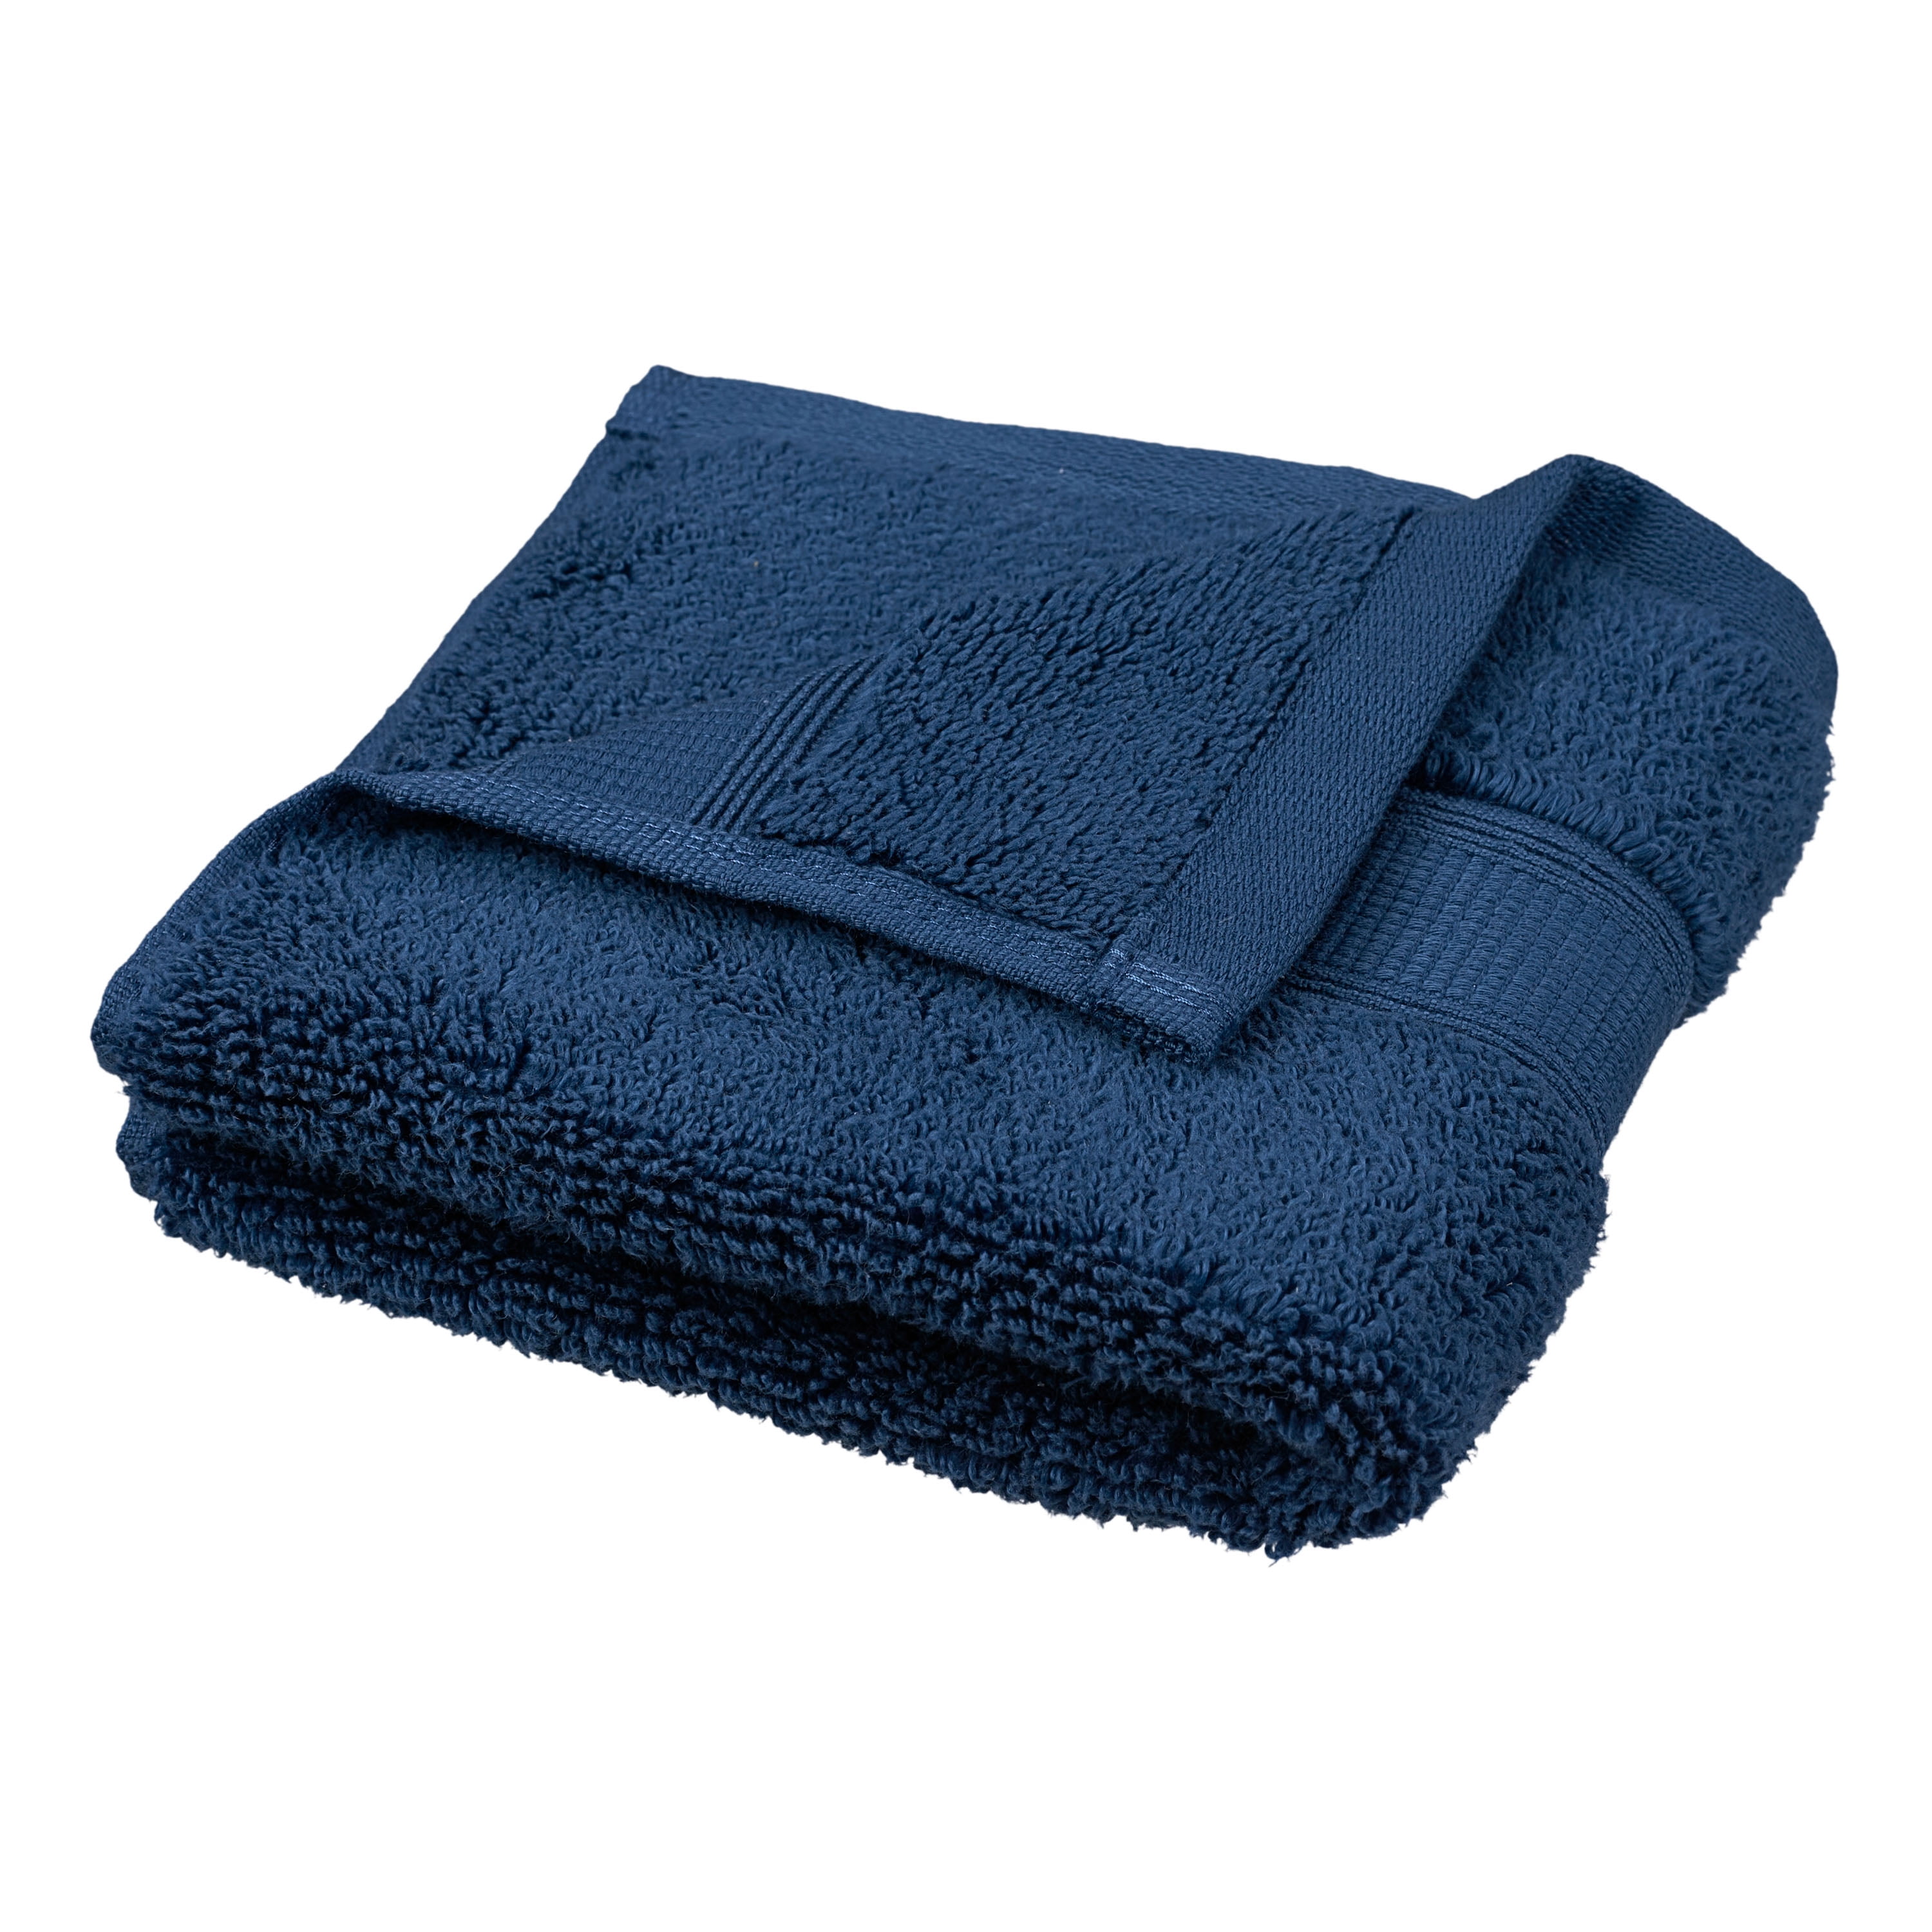 Egyptian Cotton 900 GSM Hotel Quality 3-Piece Towel Set, 1 Face, 1 Hand,  and 1 Bath Navy Blue